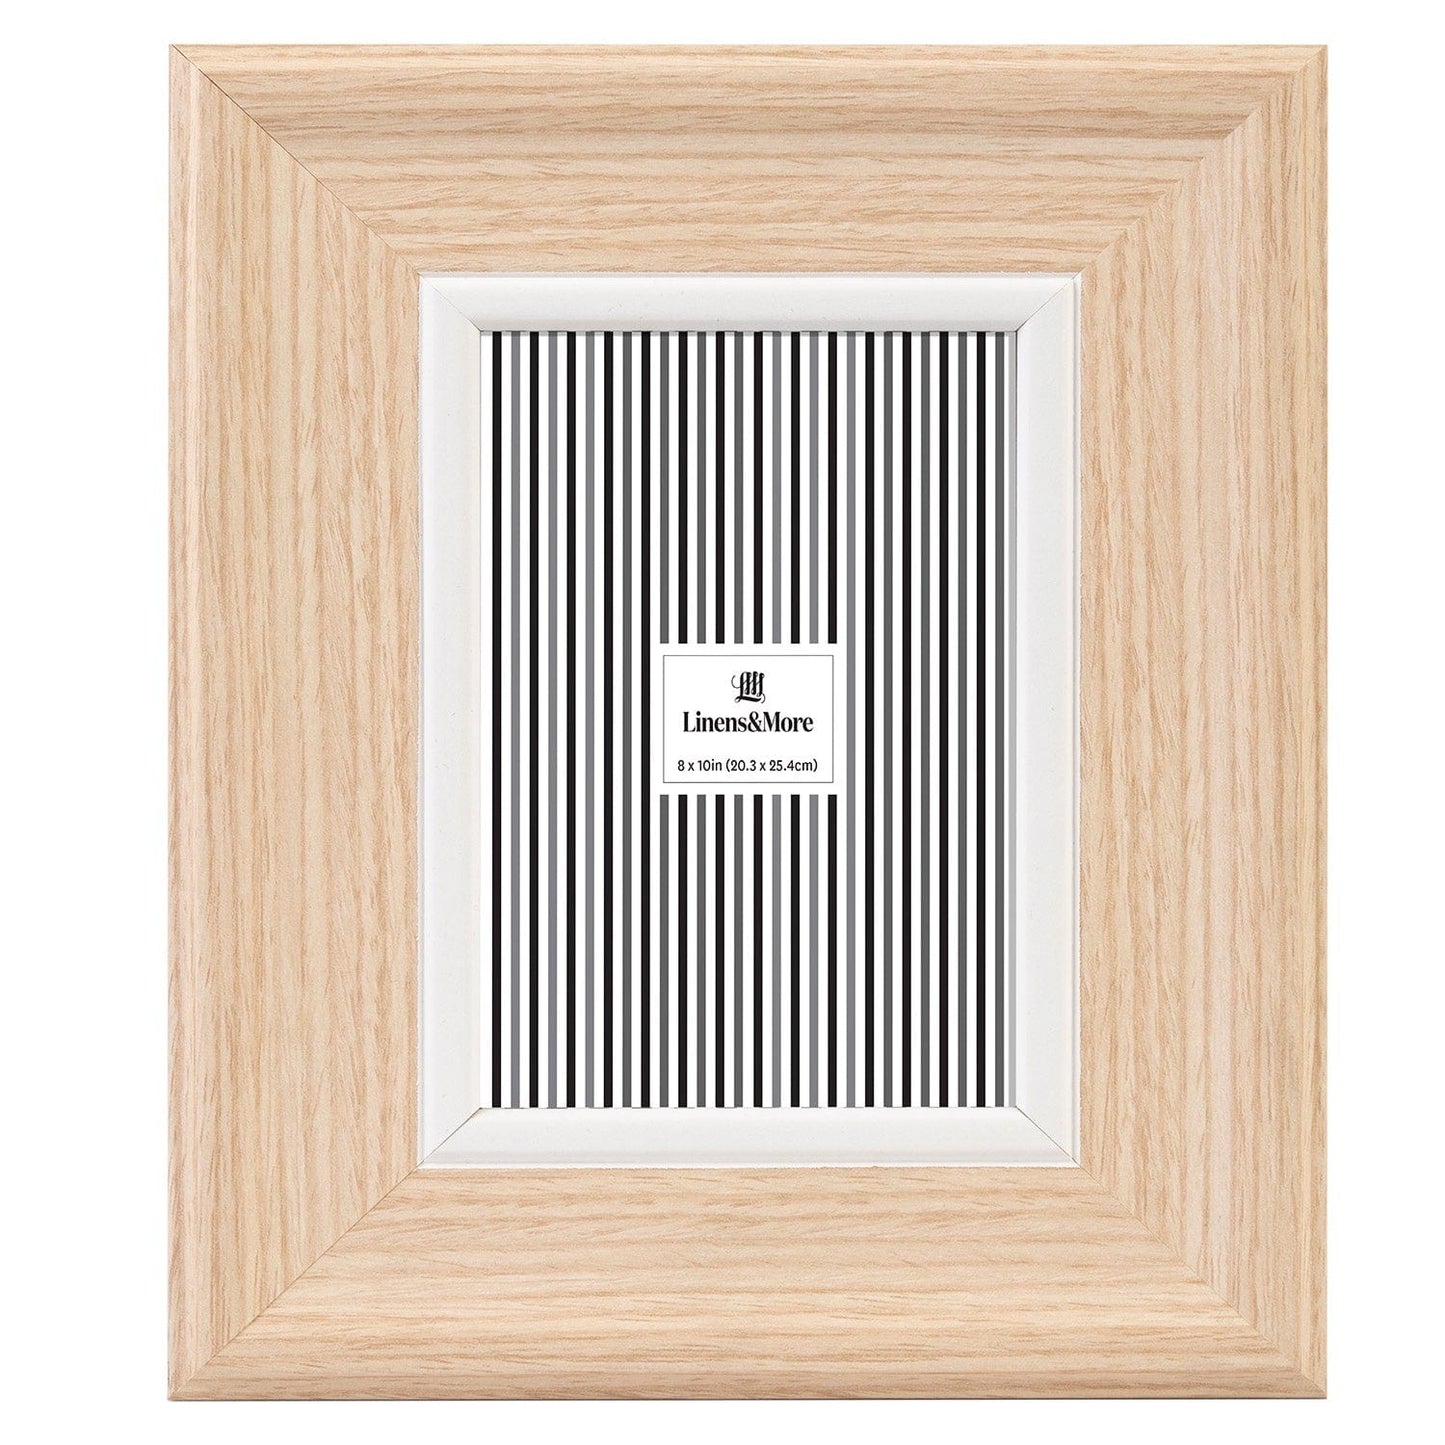 LINENS & MORE PHOTO FRAME NATURAL / WHITE 8 X1 The Homestore Auckland